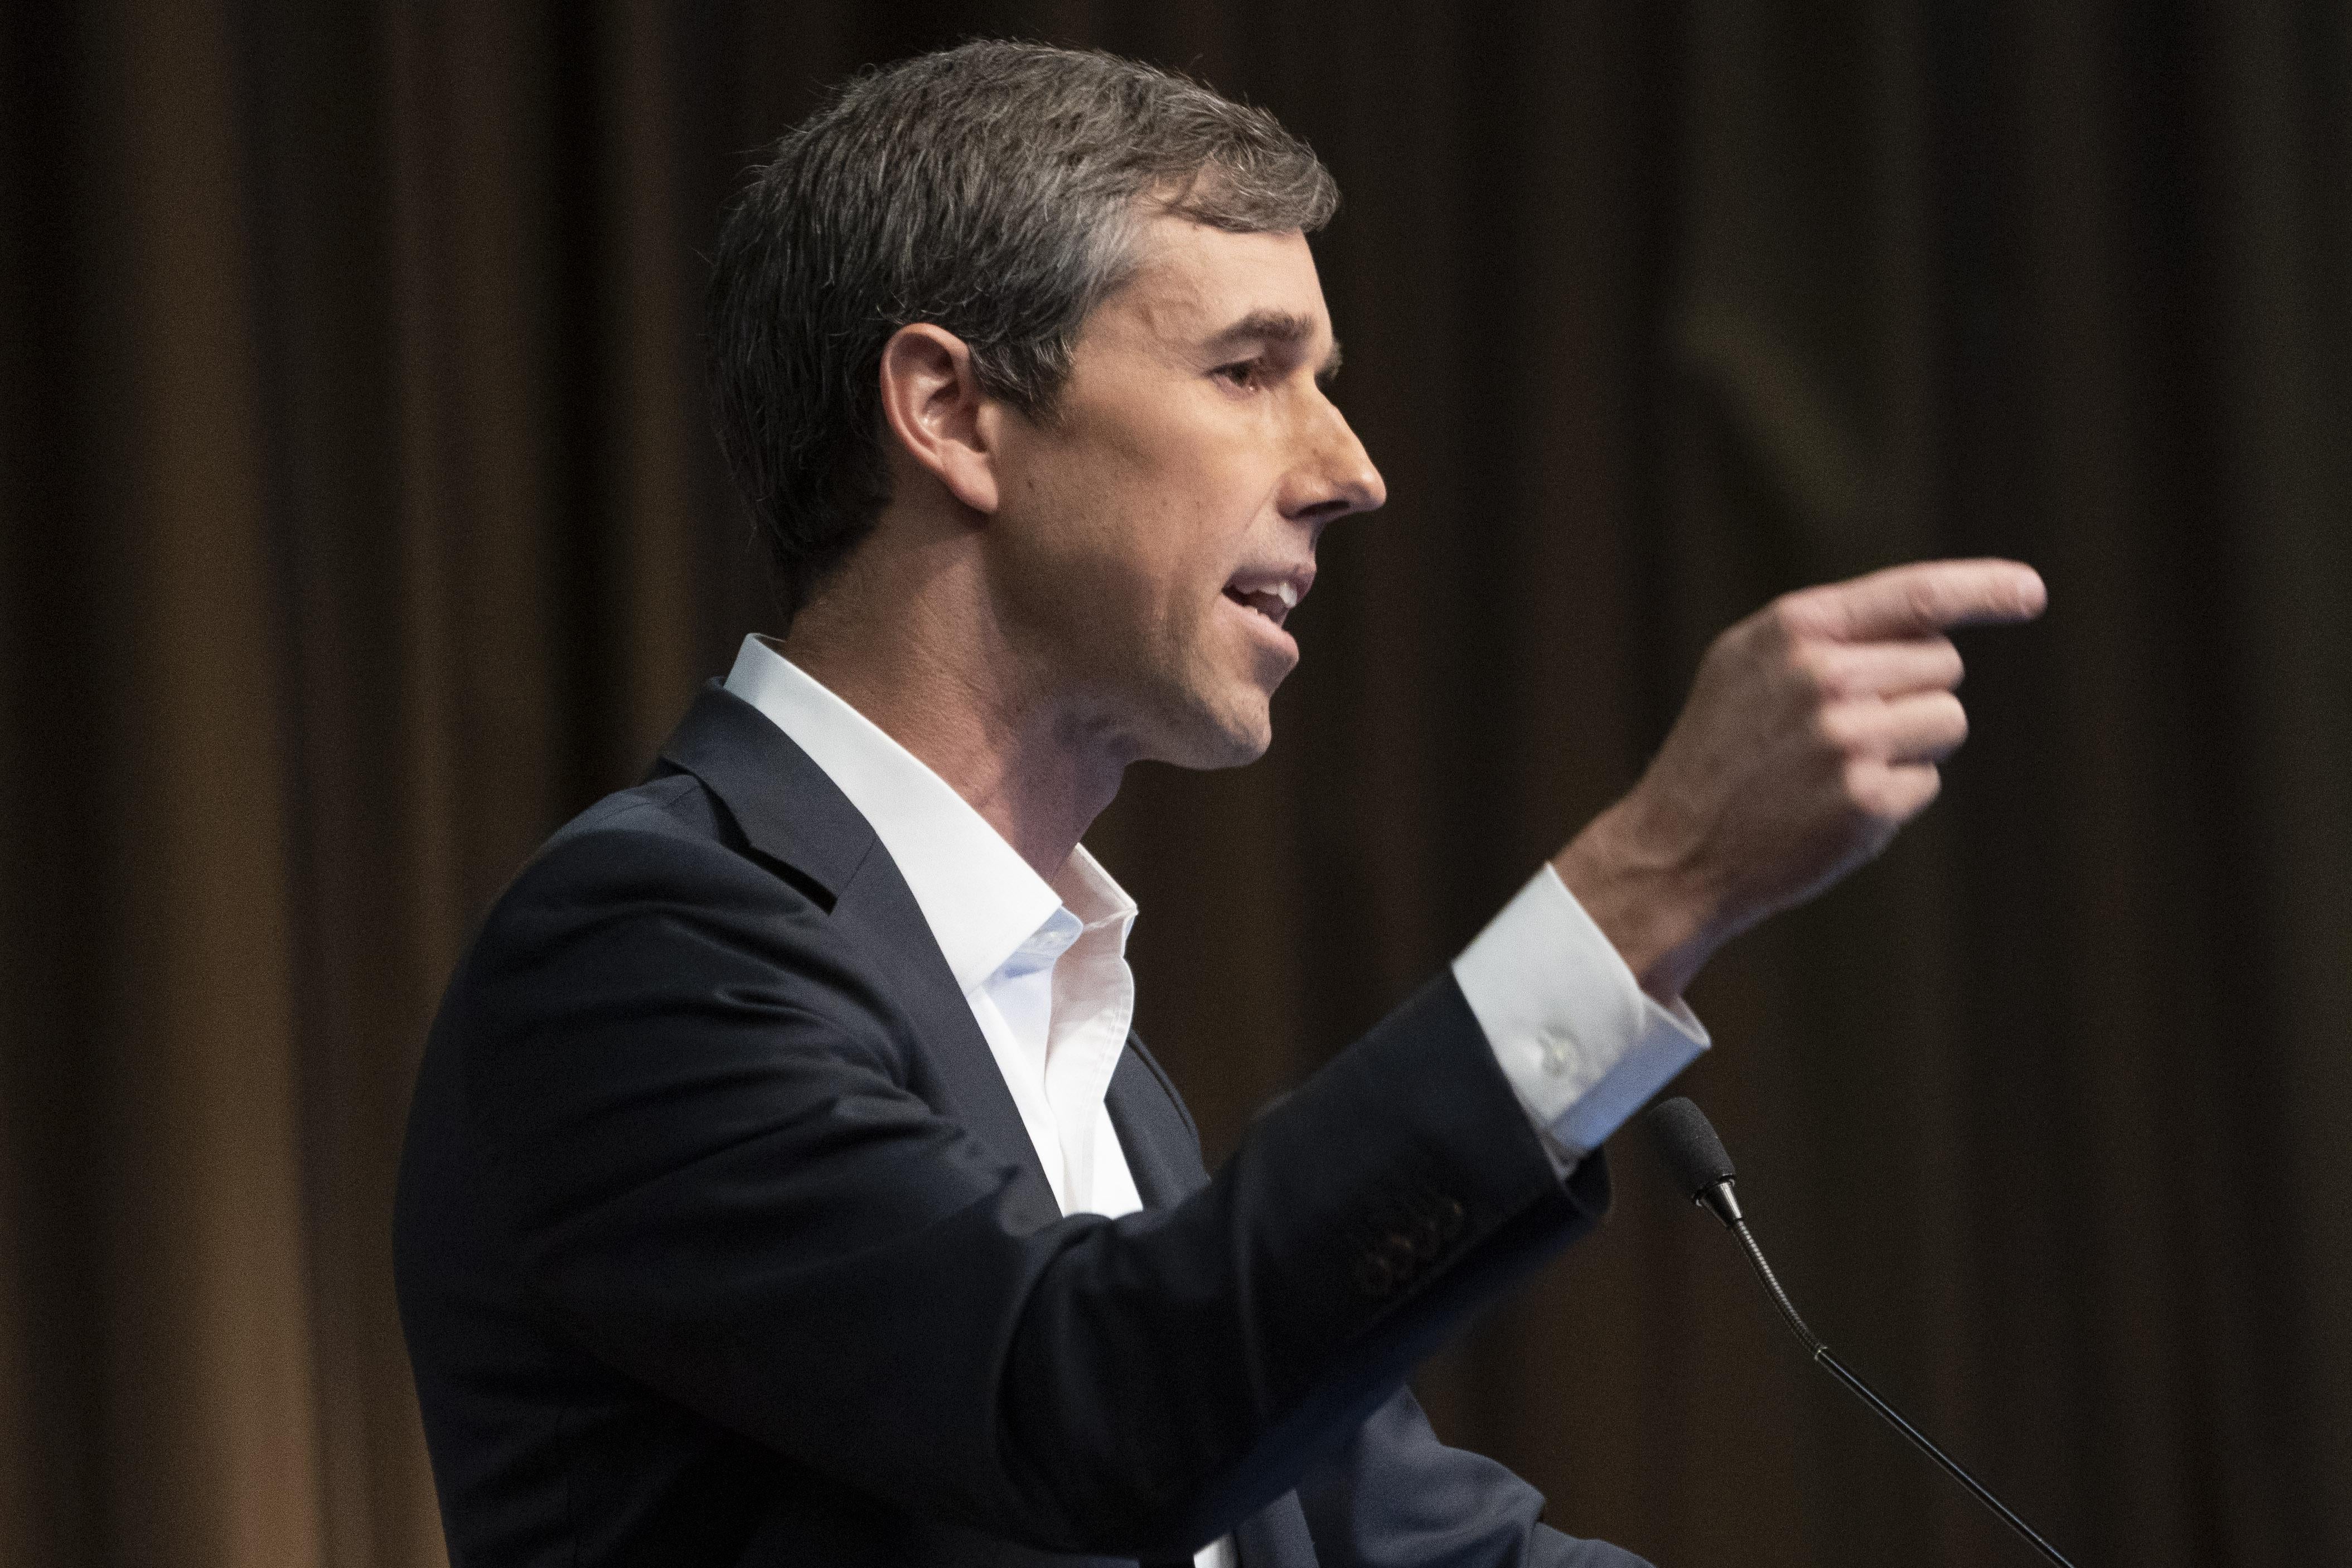 Beto O'Rourke gesticulates while speaking at an event.